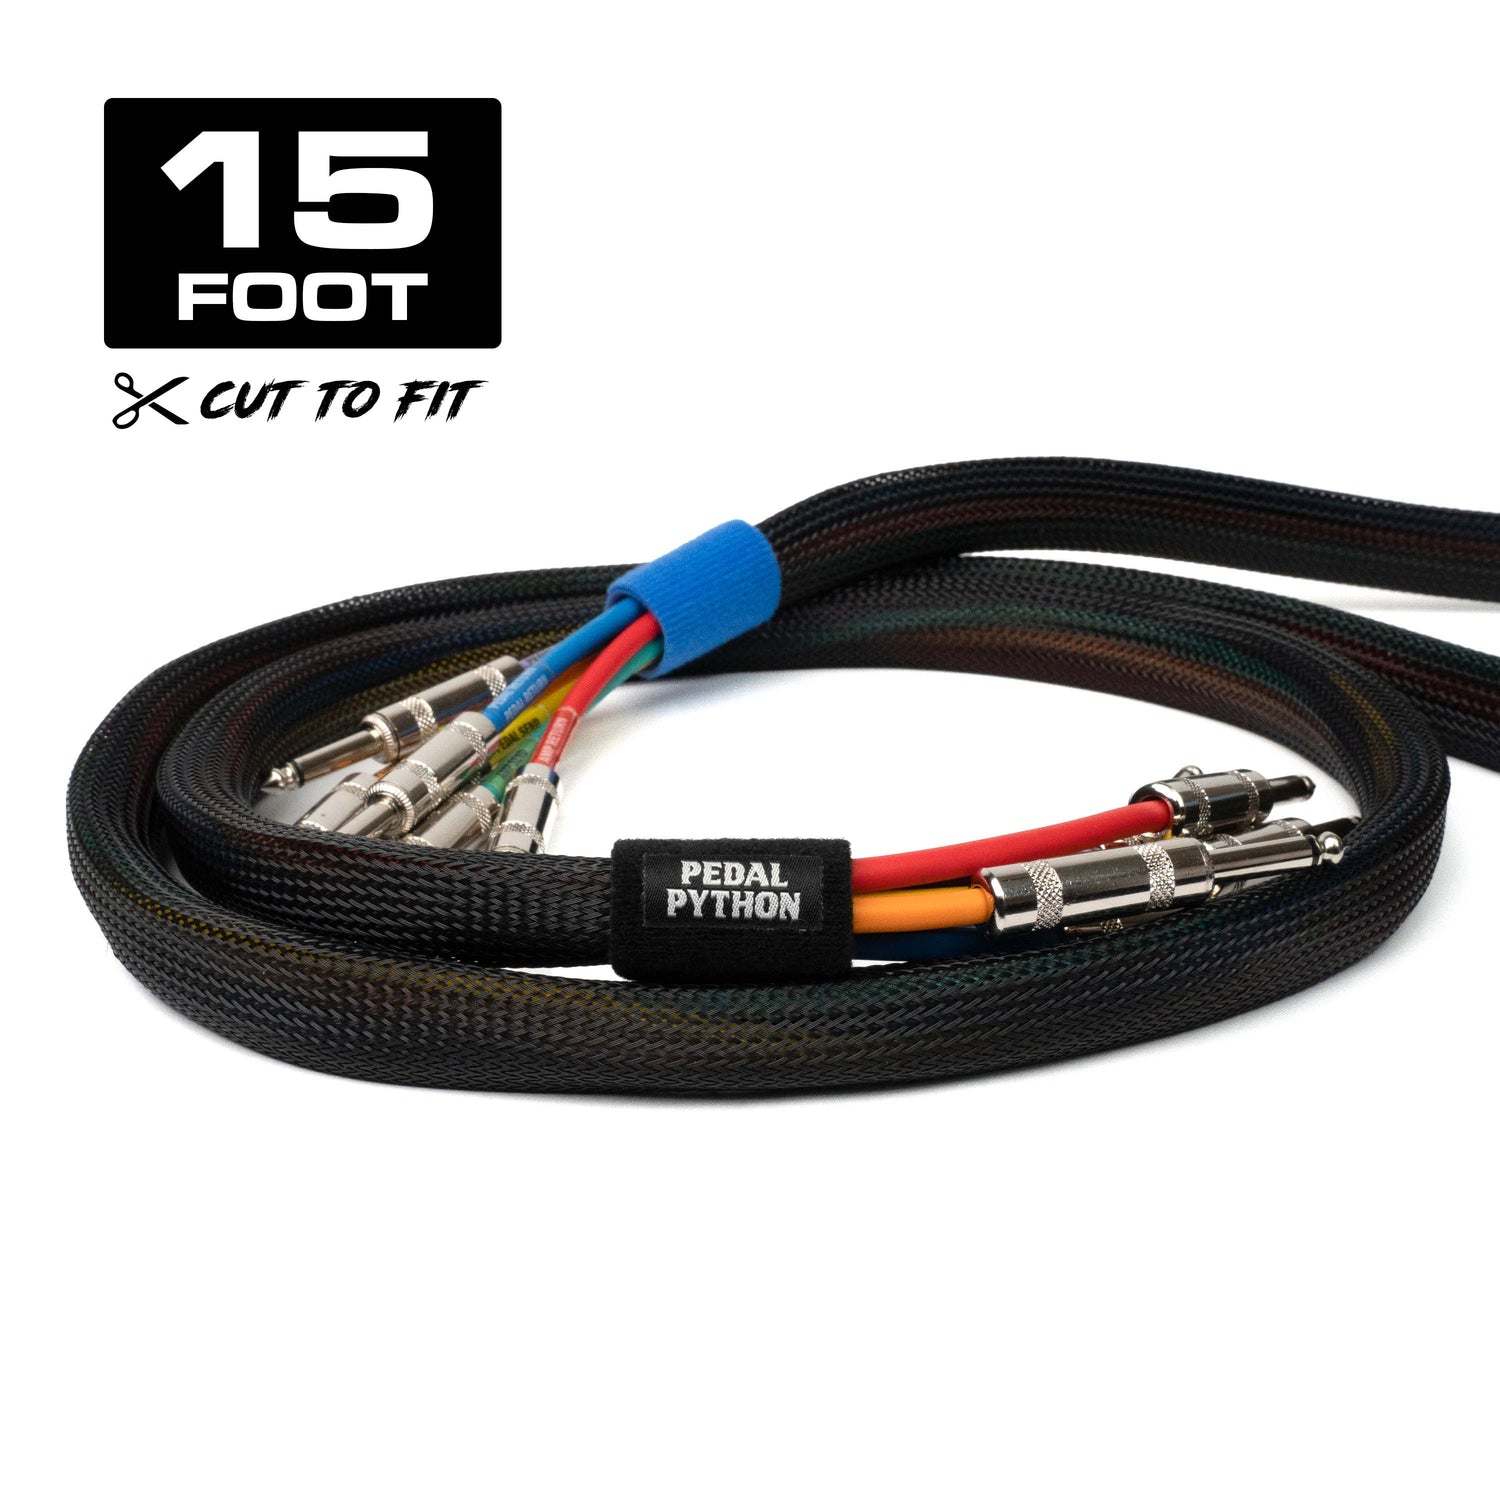 Pedal Python™ Cable Snake Management System